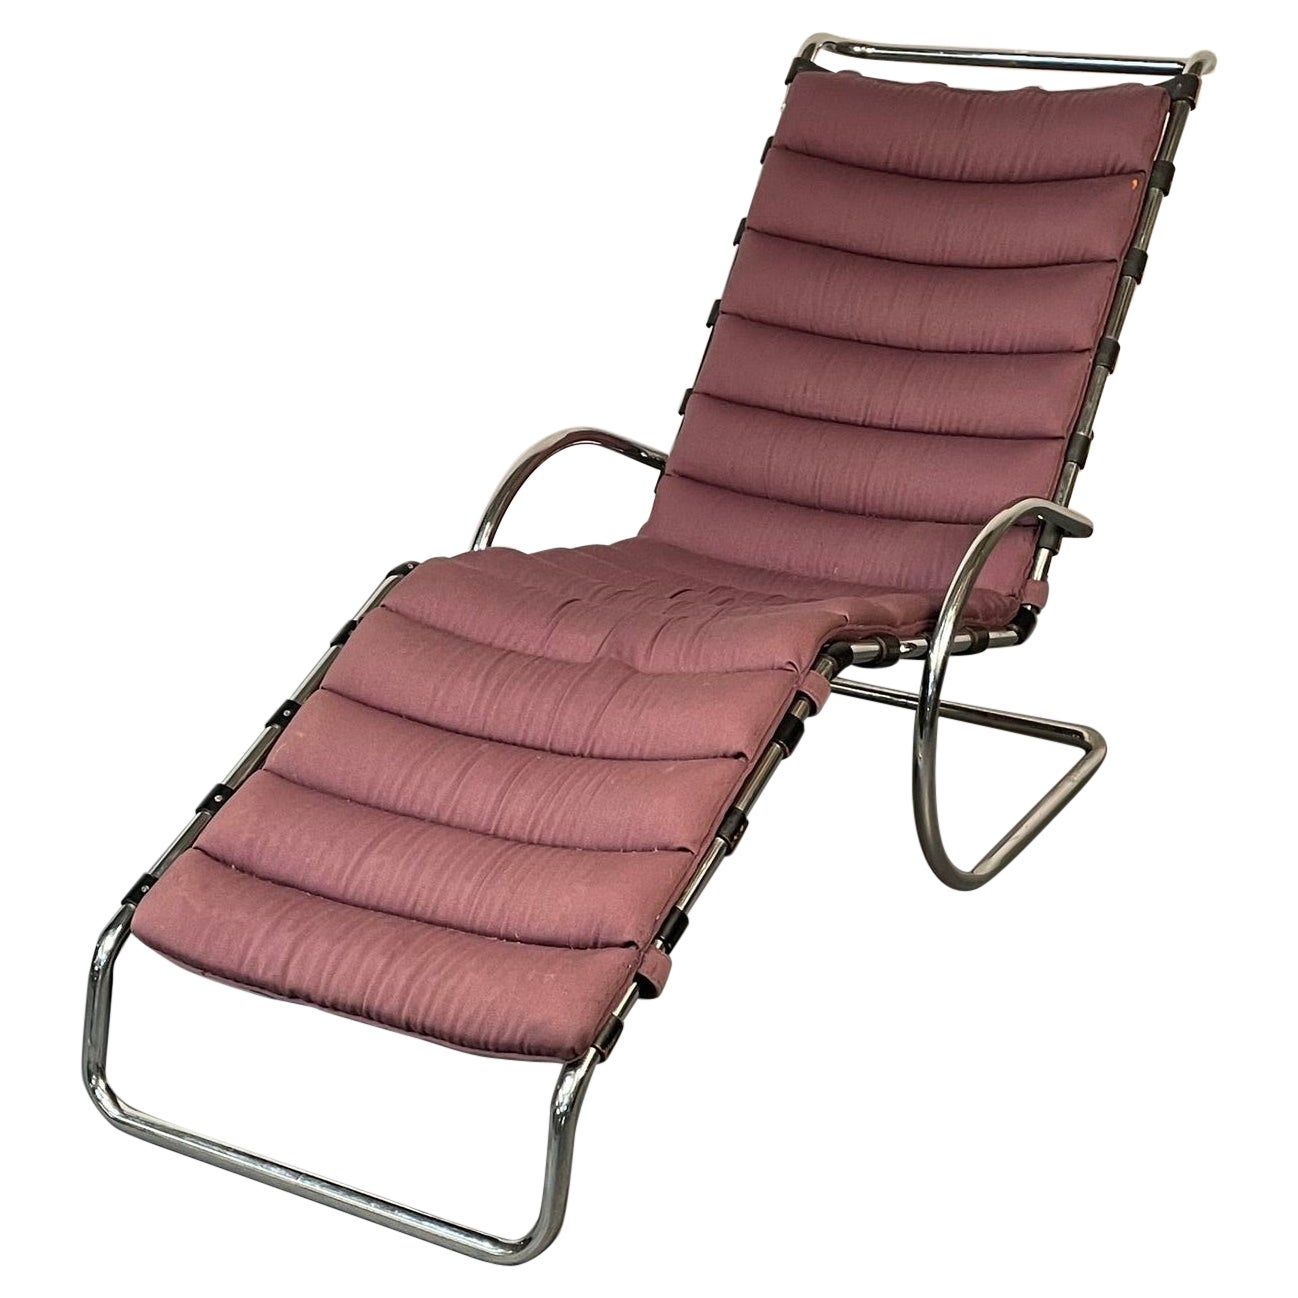 American Mid-Century Modern Chaise Lounge by Mies Van Der Rohe for Knoll, Daybed